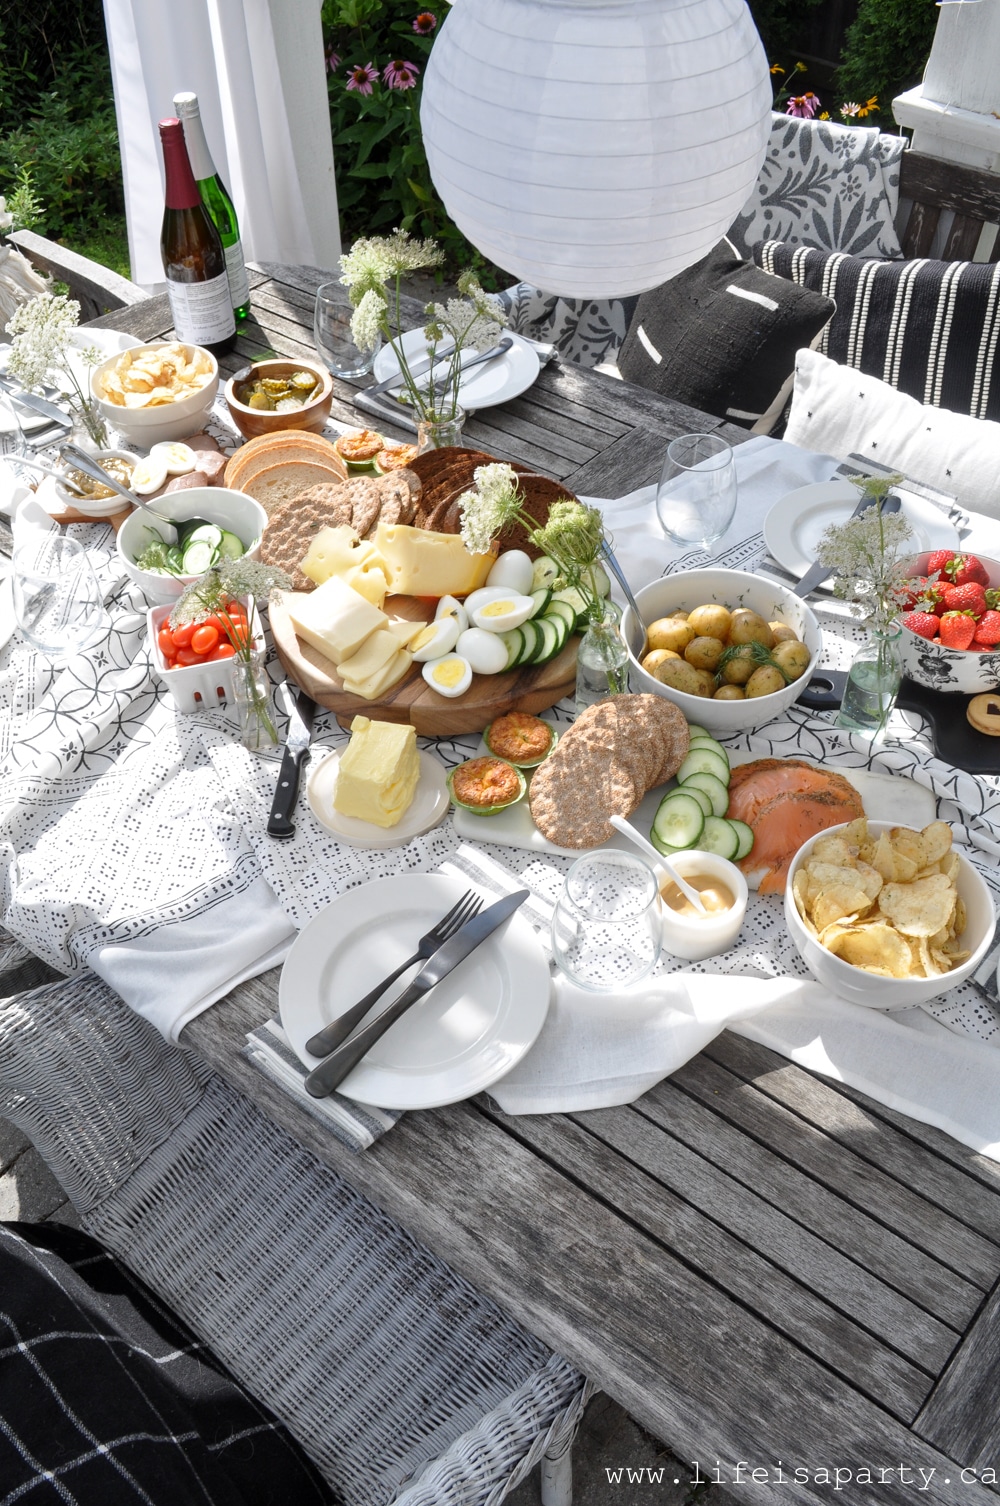 Swedish Inspired Midsummer Picnic:  Enjoy drinks, smorgasbord, and dessert all inspired by a traditional Swedish Midsummer menu.  Easy to create at home, and so delicious!